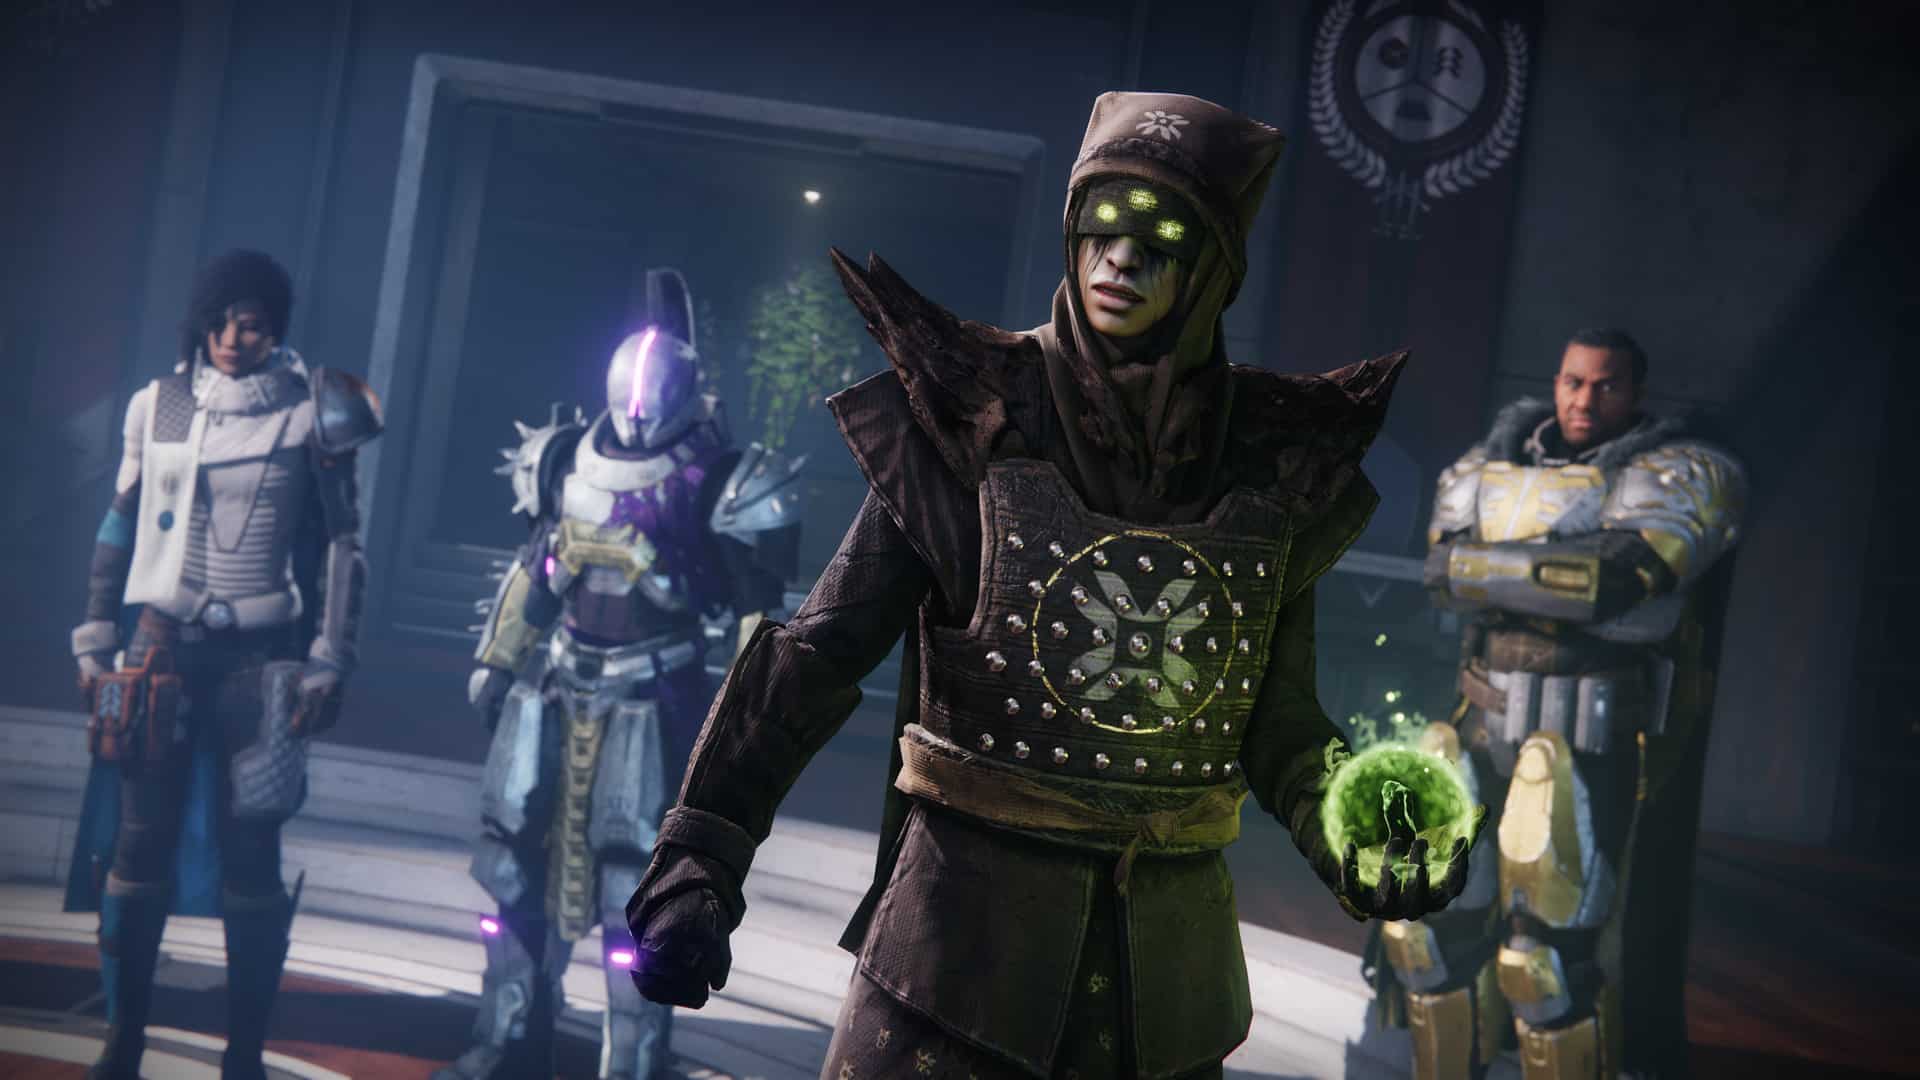 Eris Morn The Witch Queen